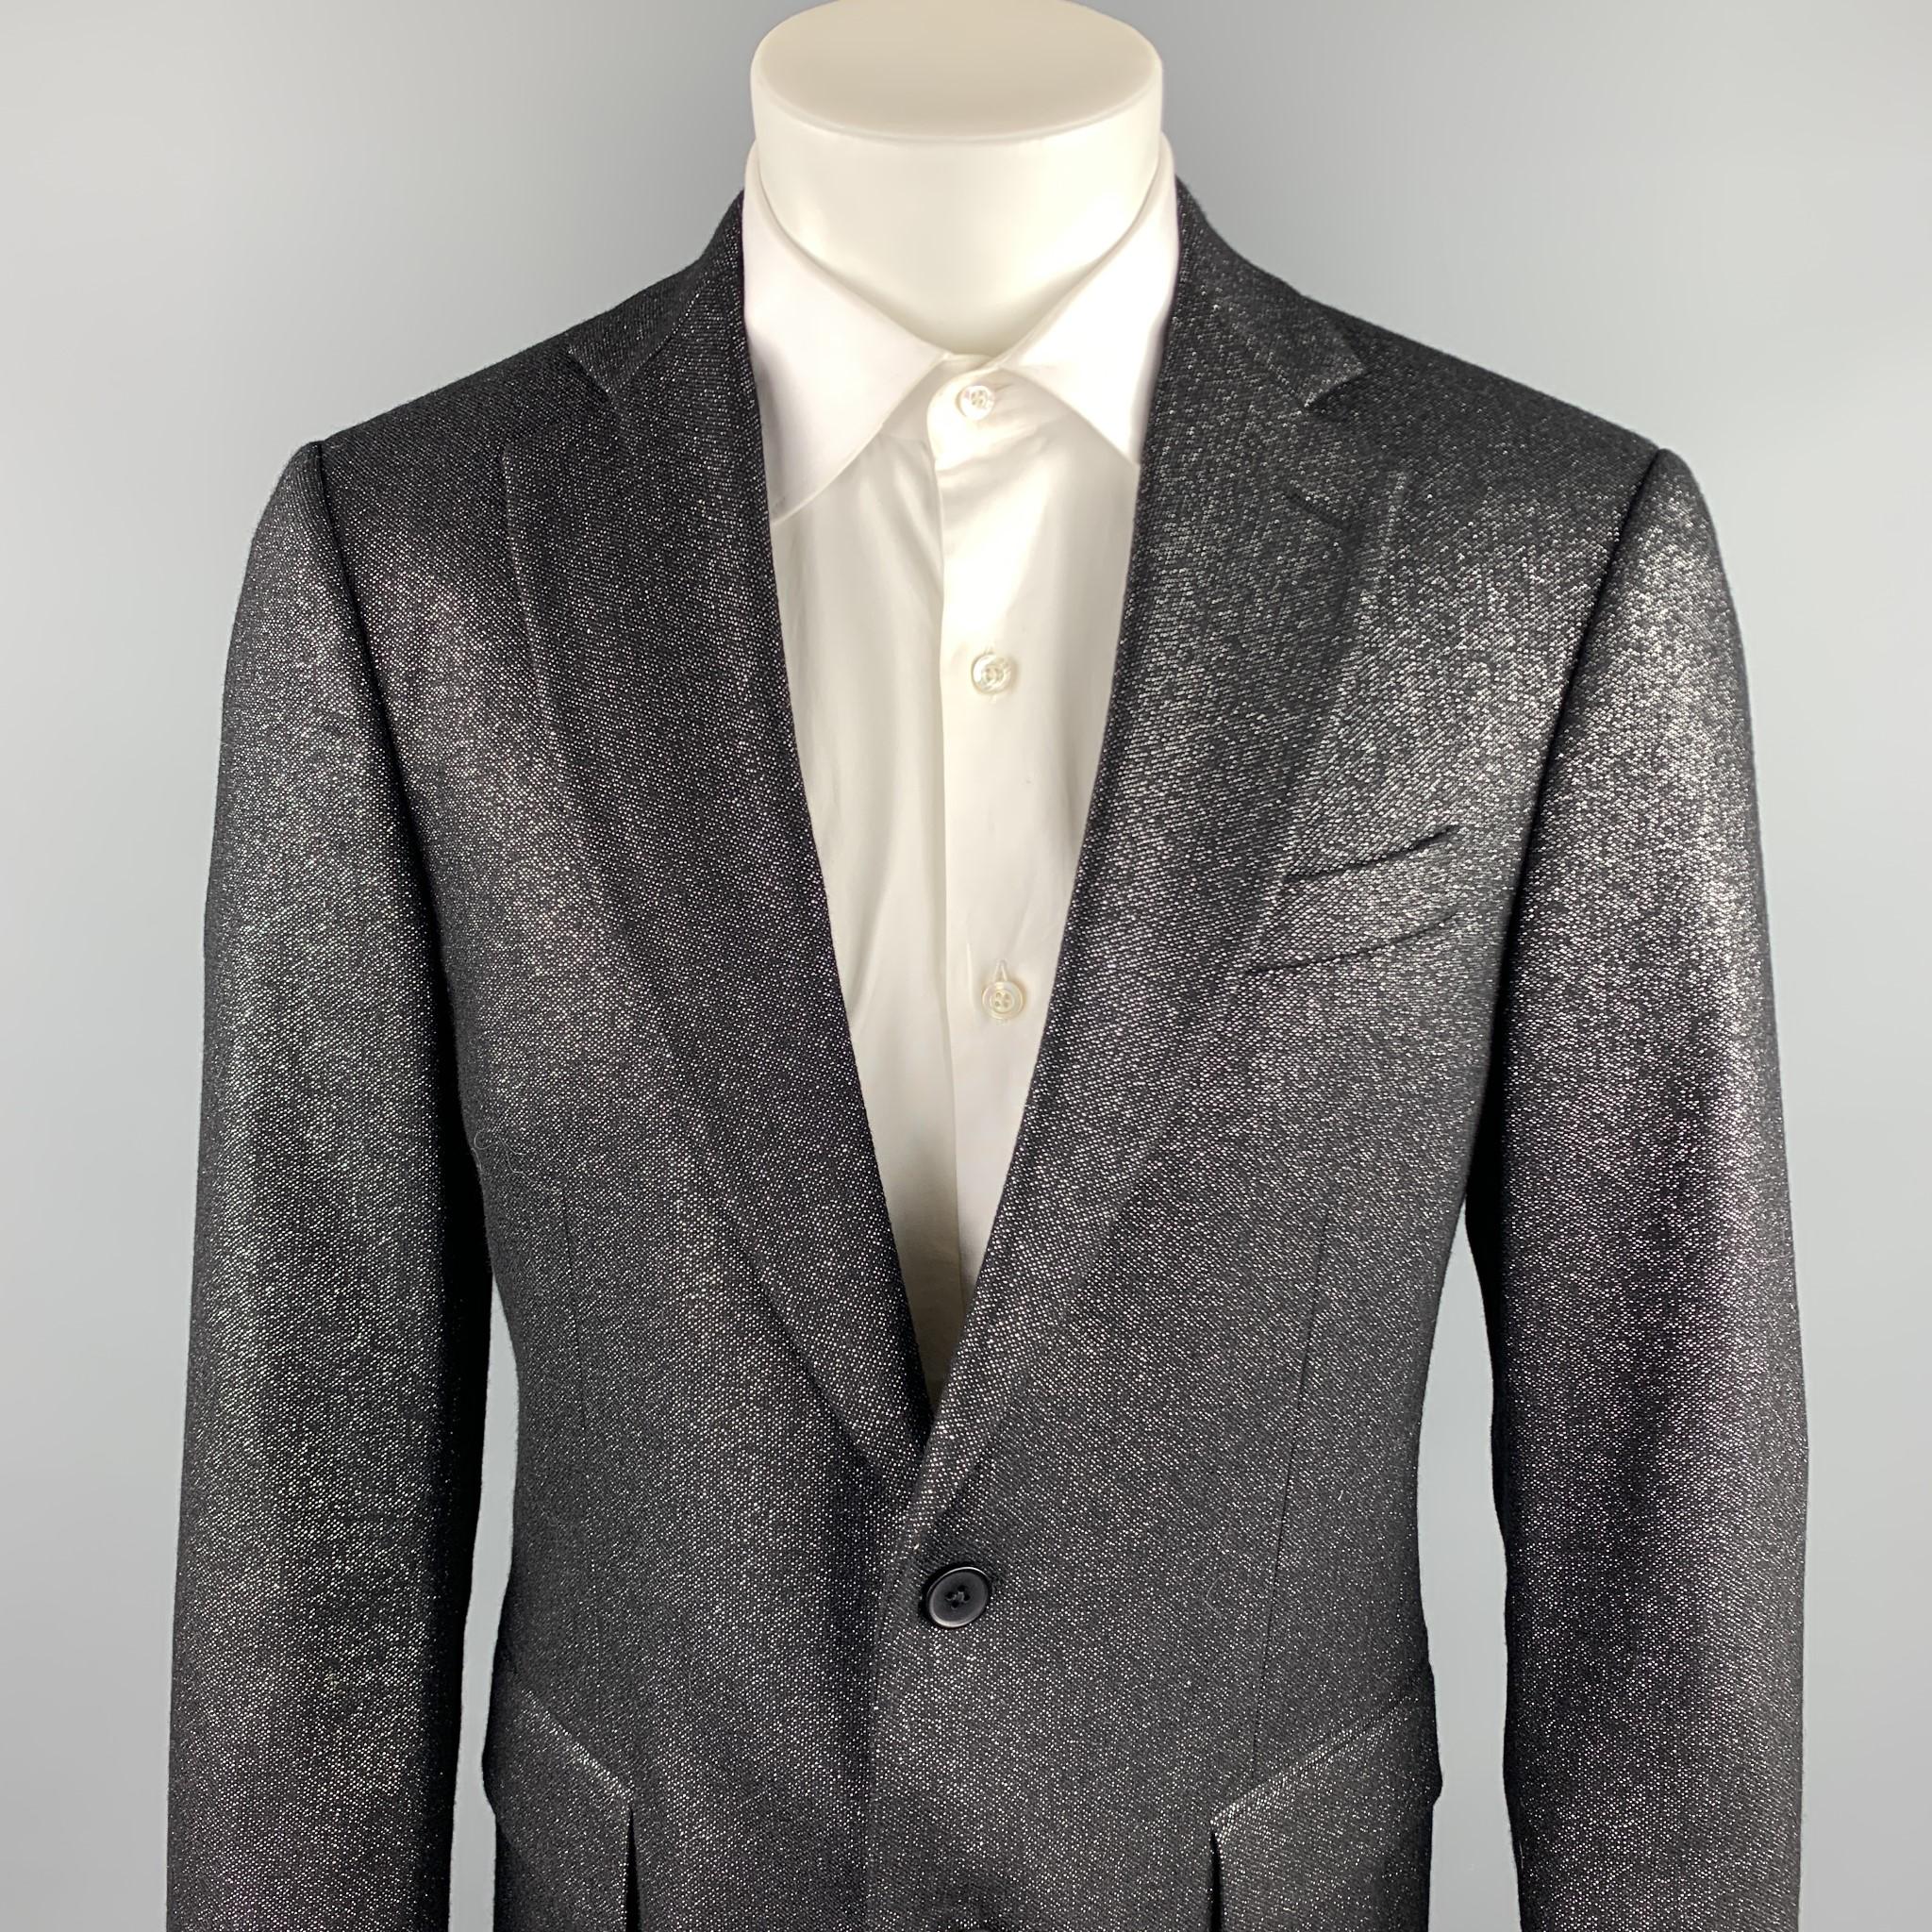 MICHAEL KORS sport coat comes in a black & silver metallic wool blend featuring a notch lapel style, flap pockets, and a two button closure. Made in Italy.

Excellent Pre-Owned Condition.
Marked: 40/50 REG

Measurements:

Shoulder: 17 in. 
Chest: 40